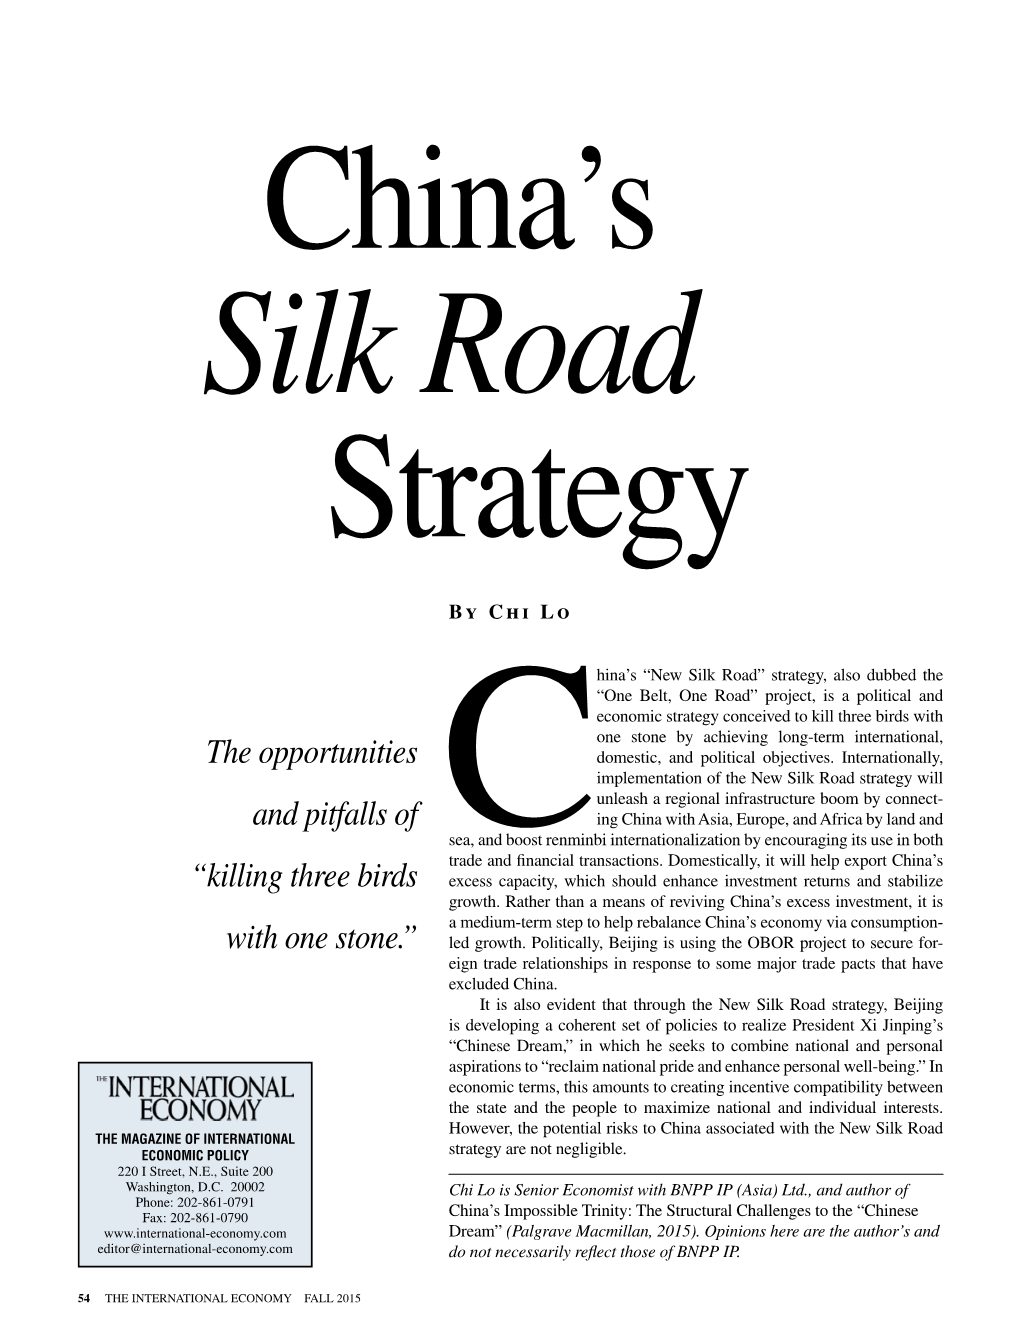 China's “New Silk Road” Strategy, Also Dubbed